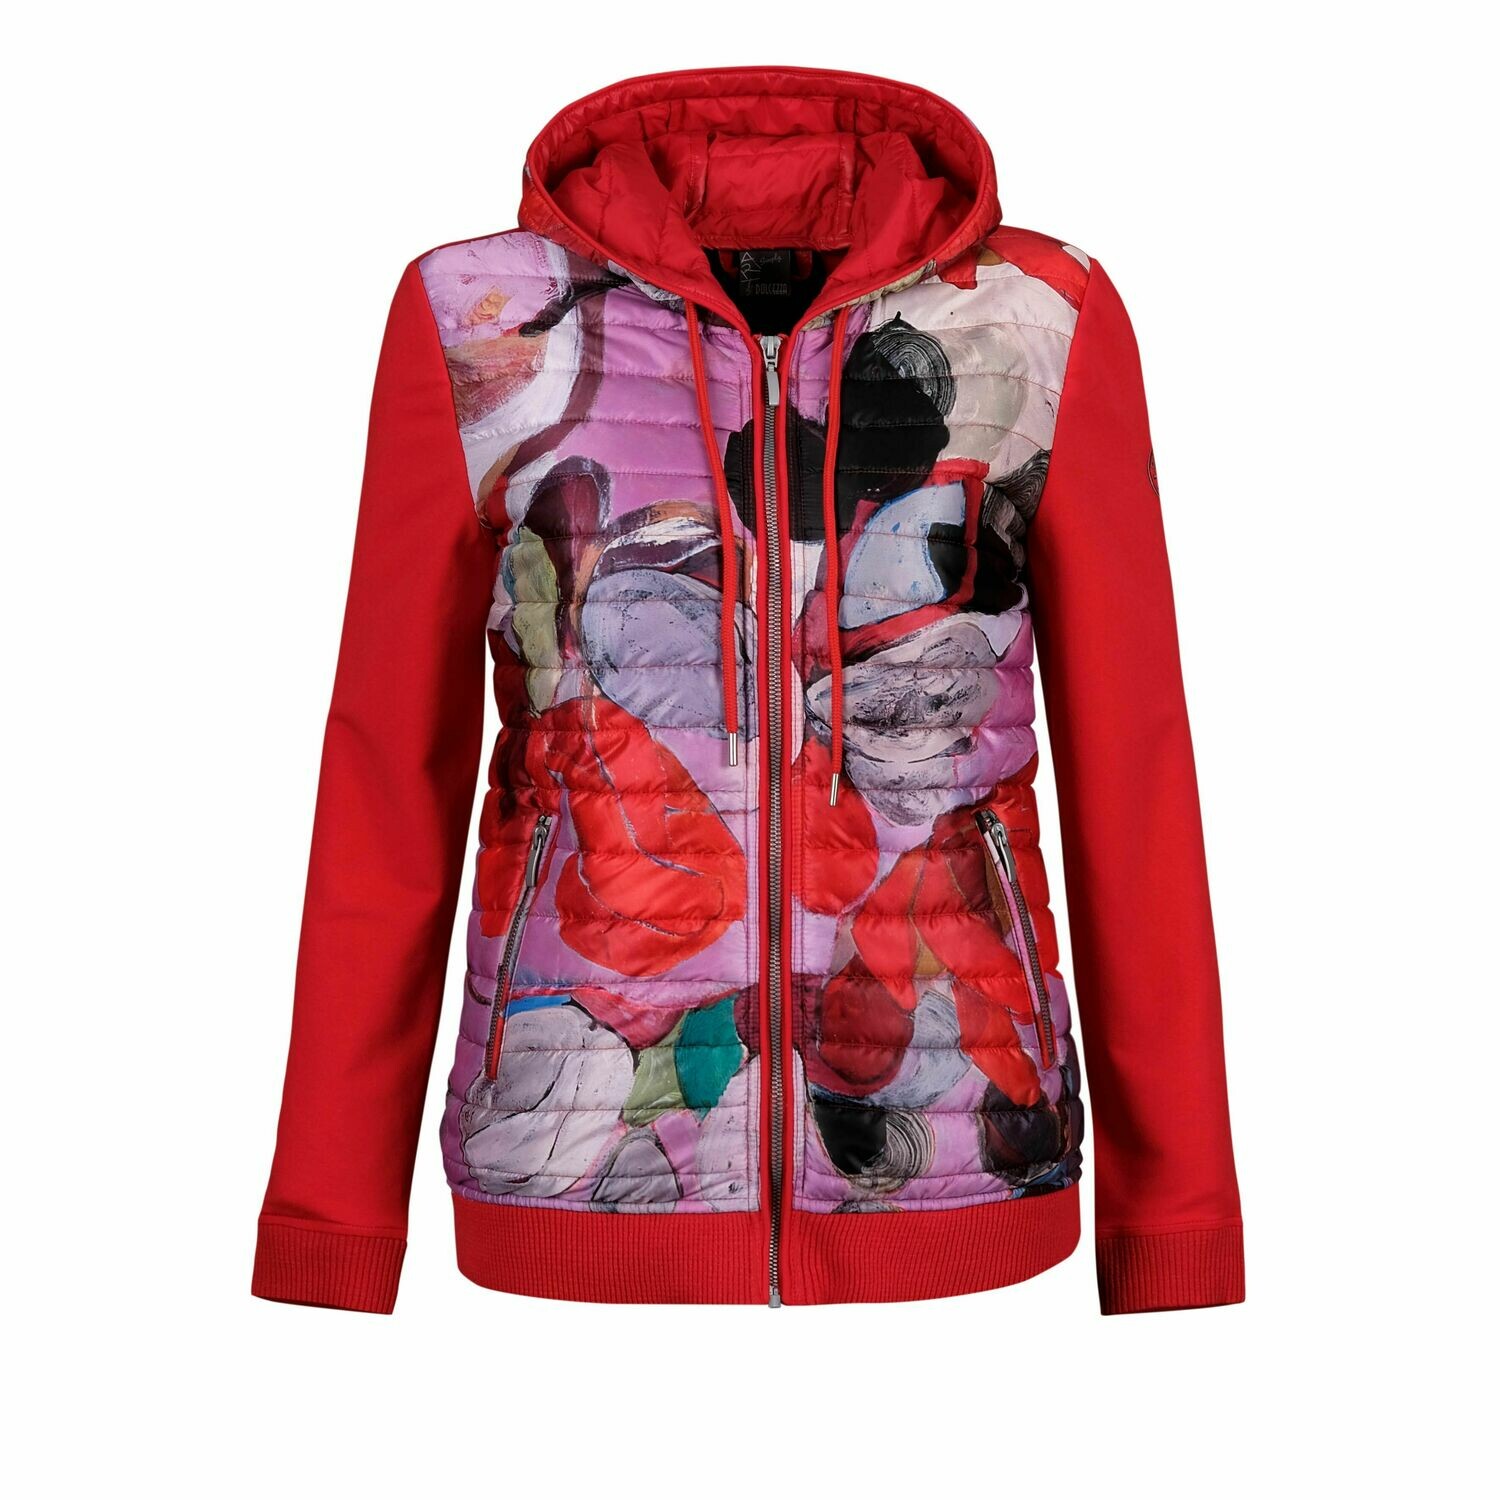 Simply Art Dolcezza: Blooms In Rouge Abstract Art Puff Hoodie Jacket SOLD OUT